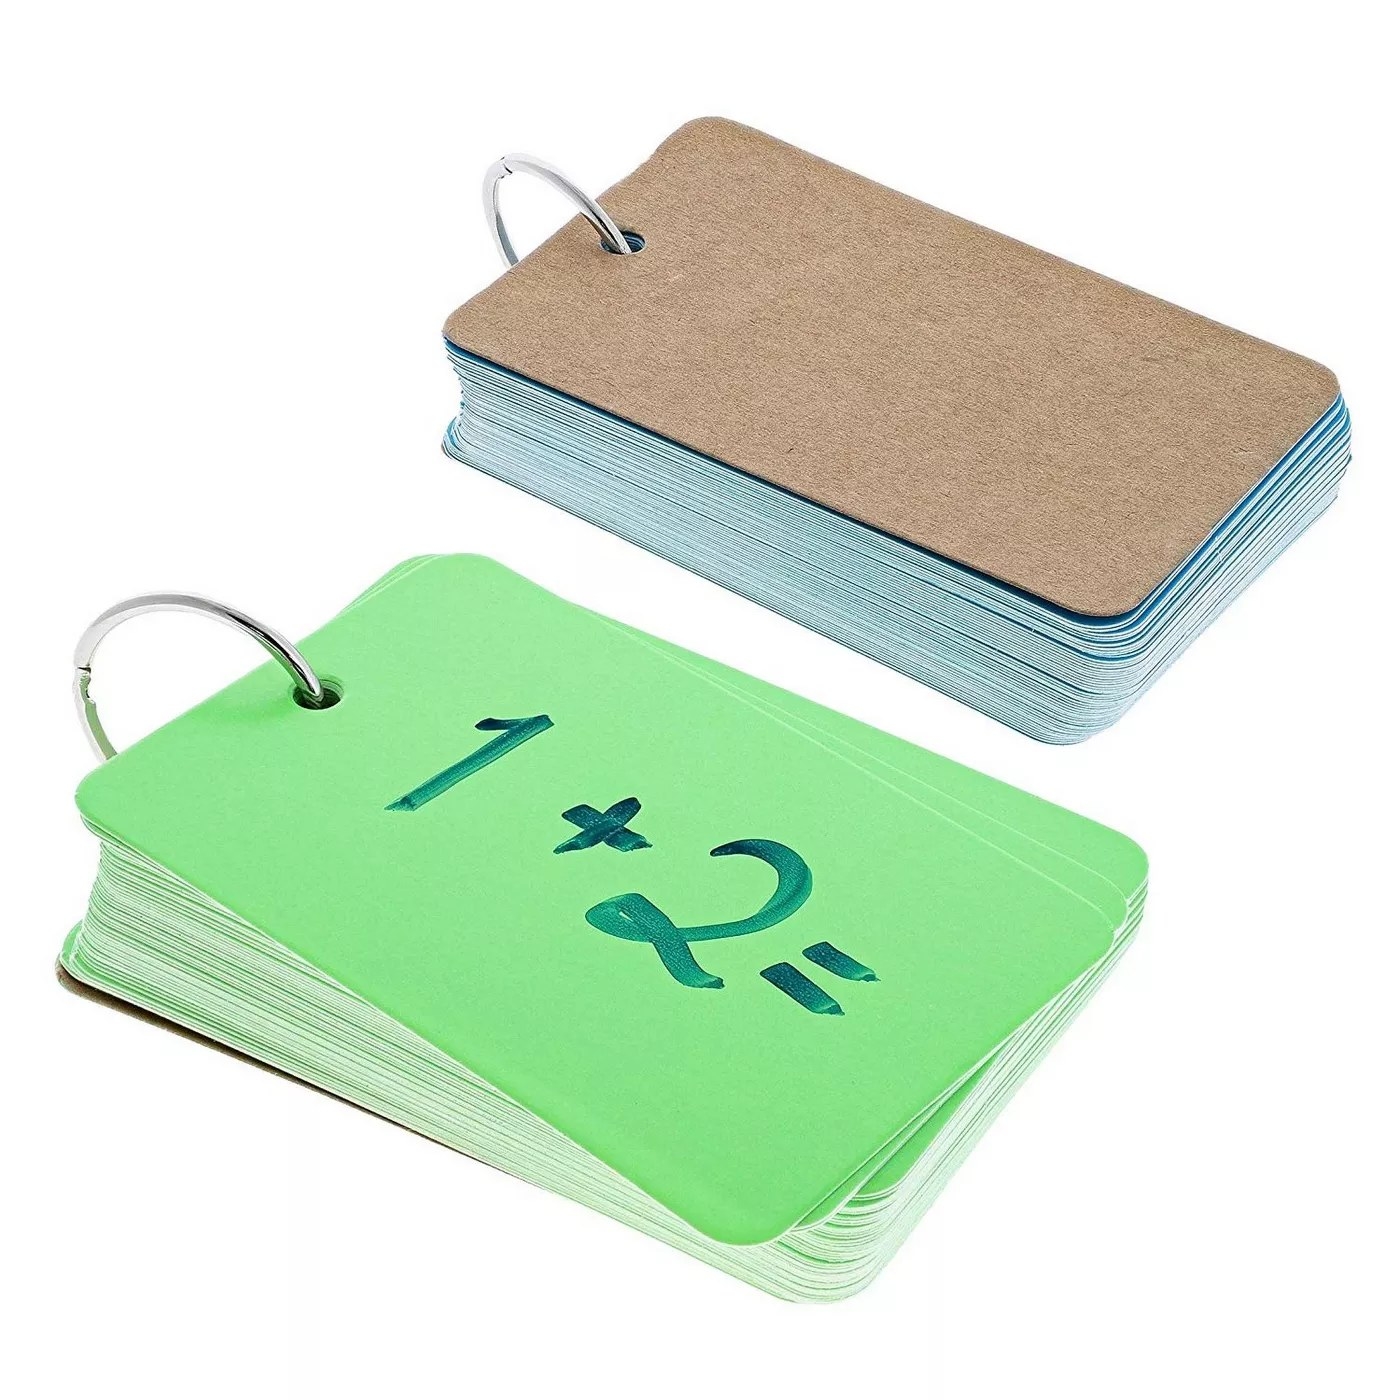 The packs of flashcards in neon green and neon blue on rings